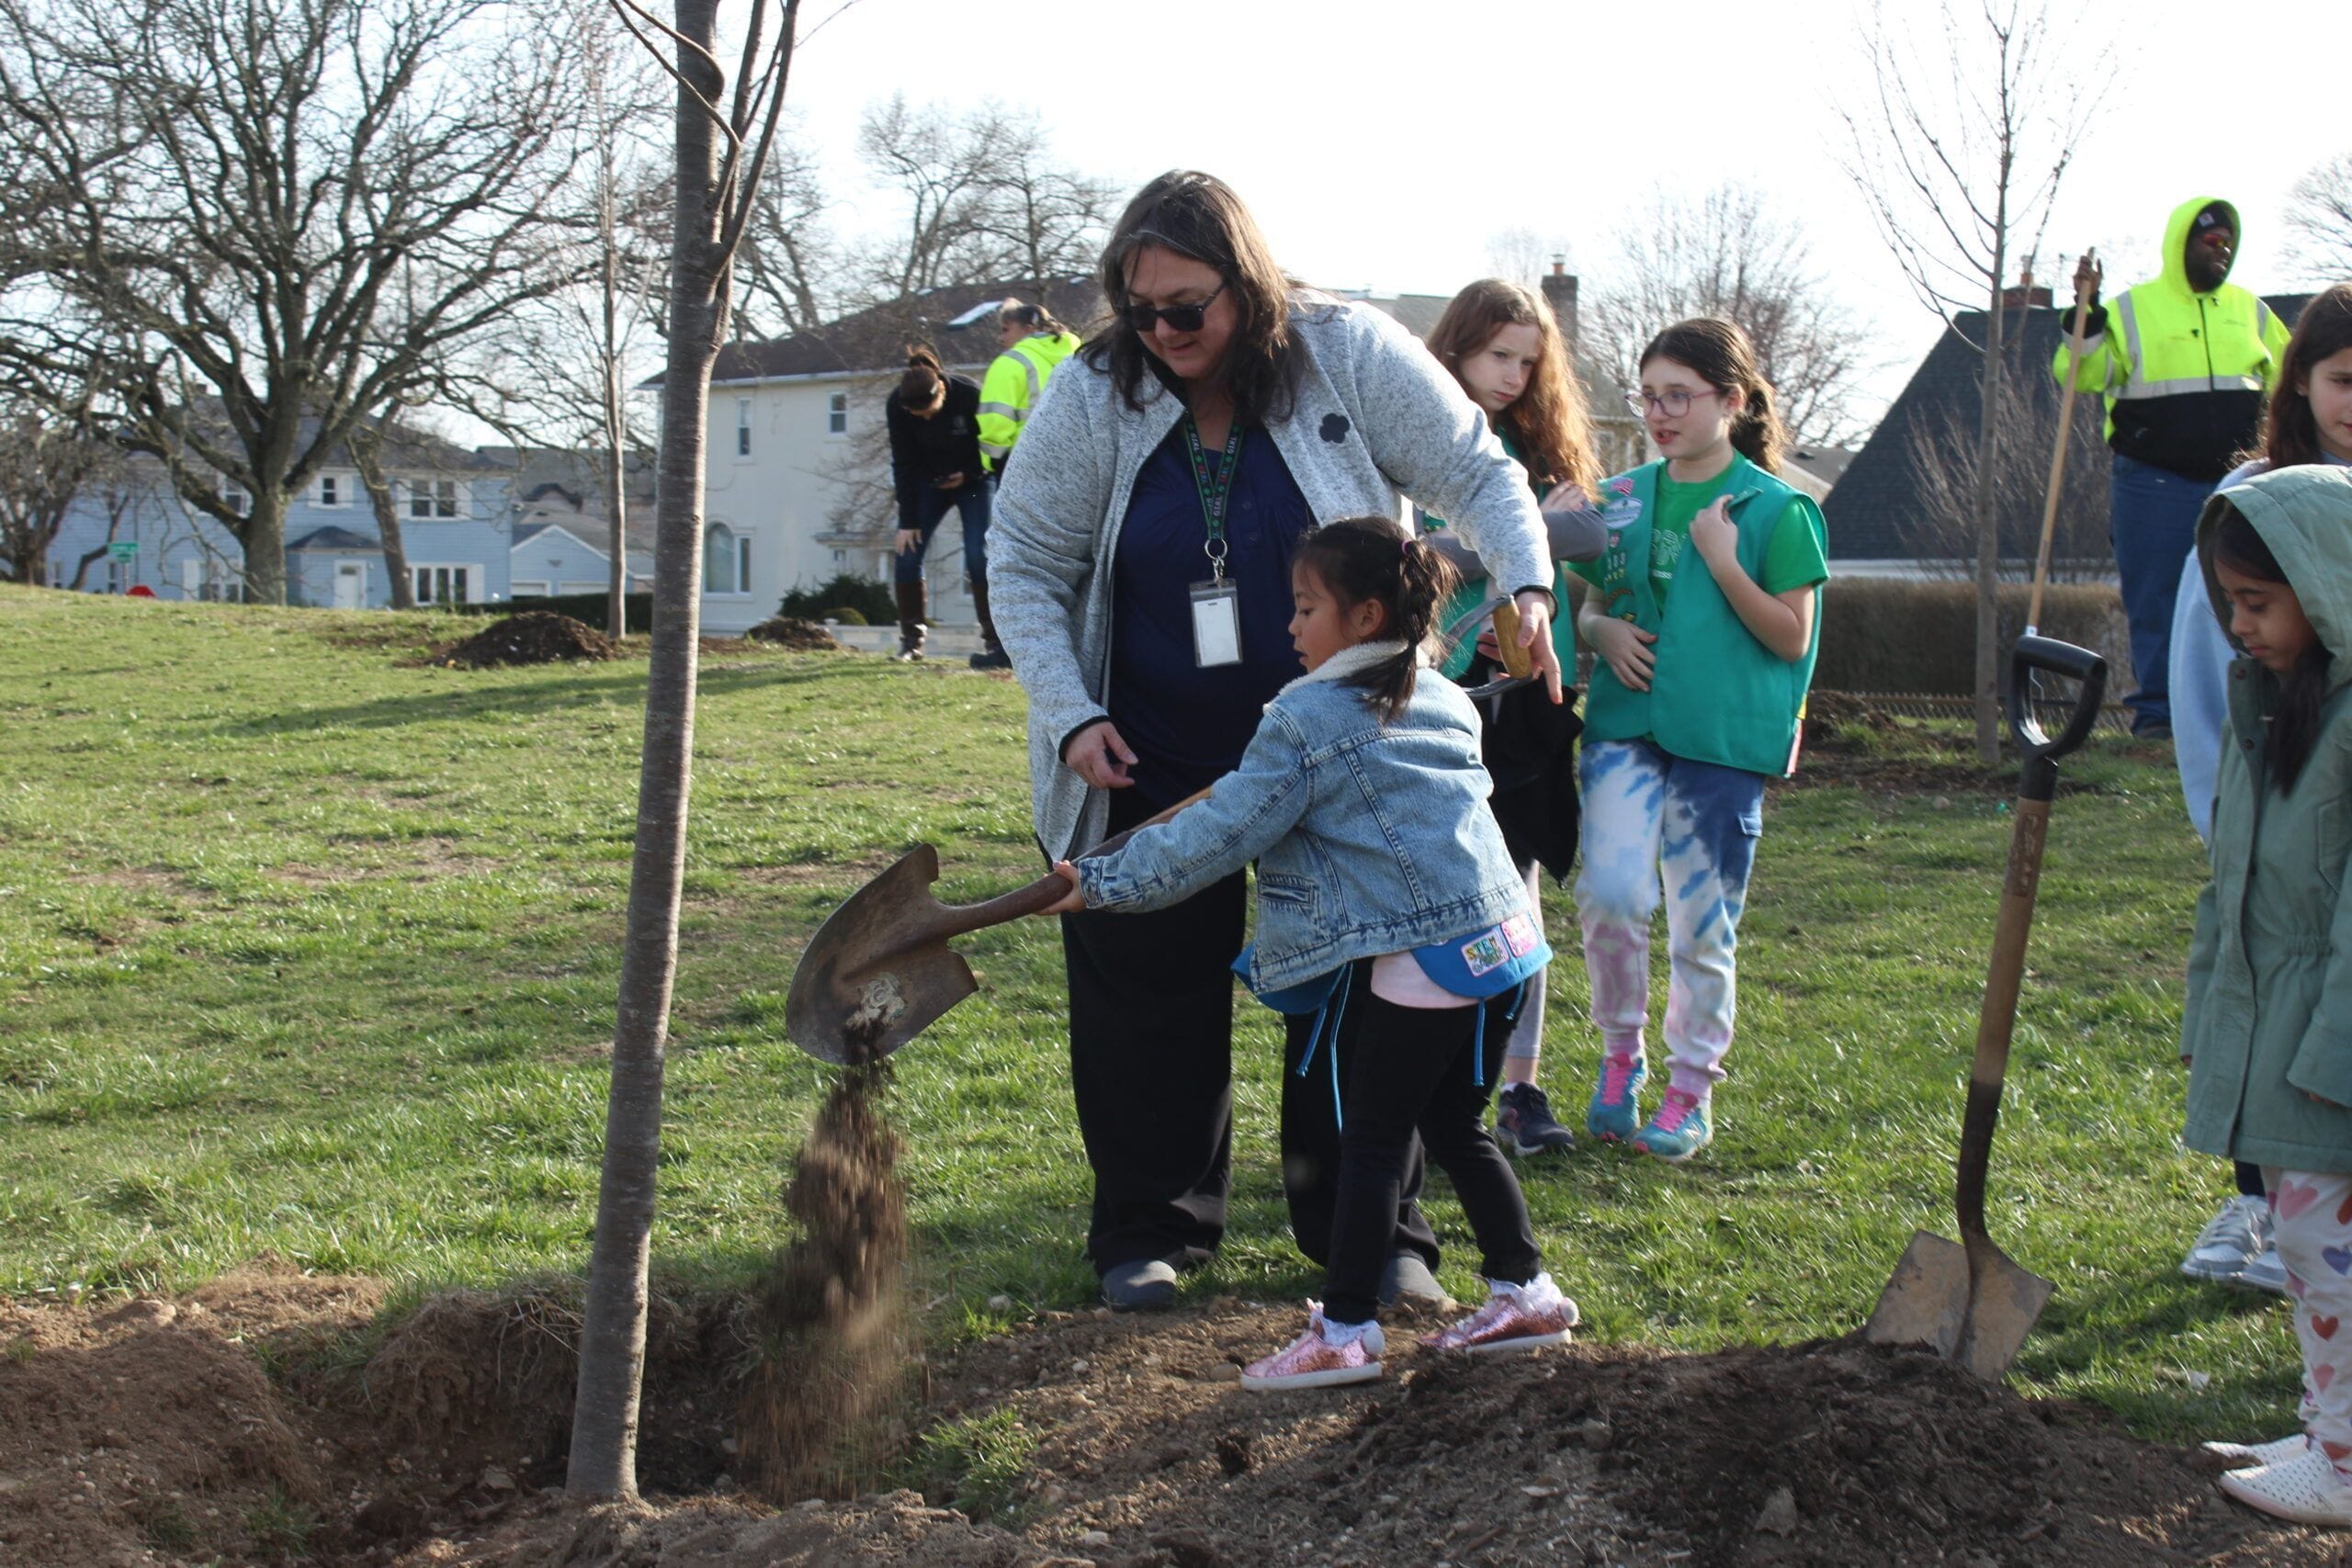 Girl Scouts And National Grid Lead Beautification Effort In New Hyde Park